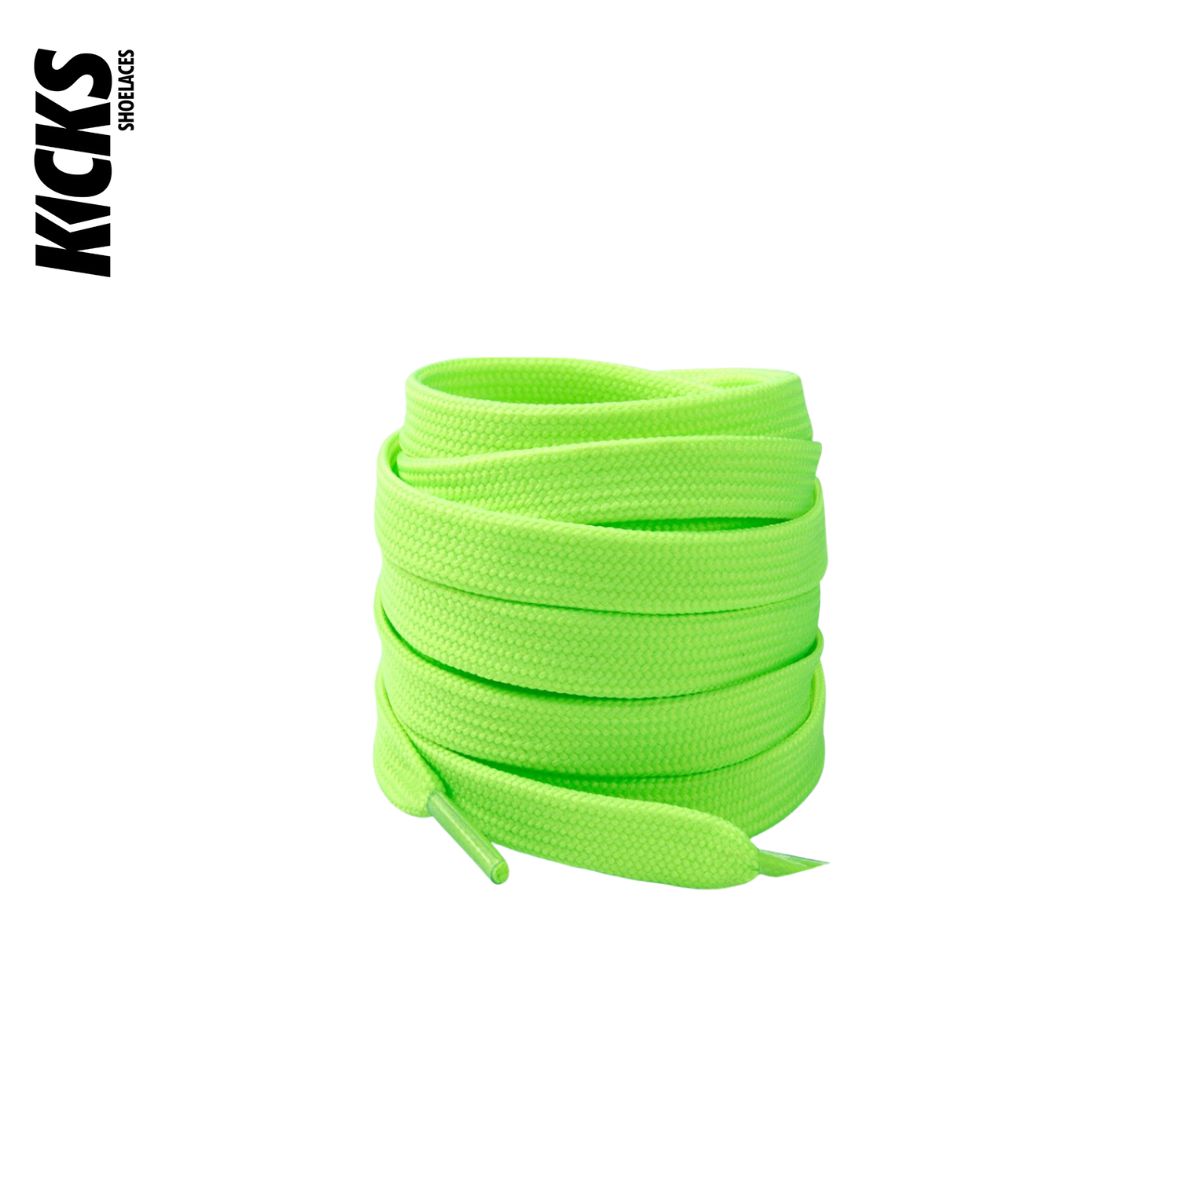 Bright Green Nike Dunks Shoelace Replacements